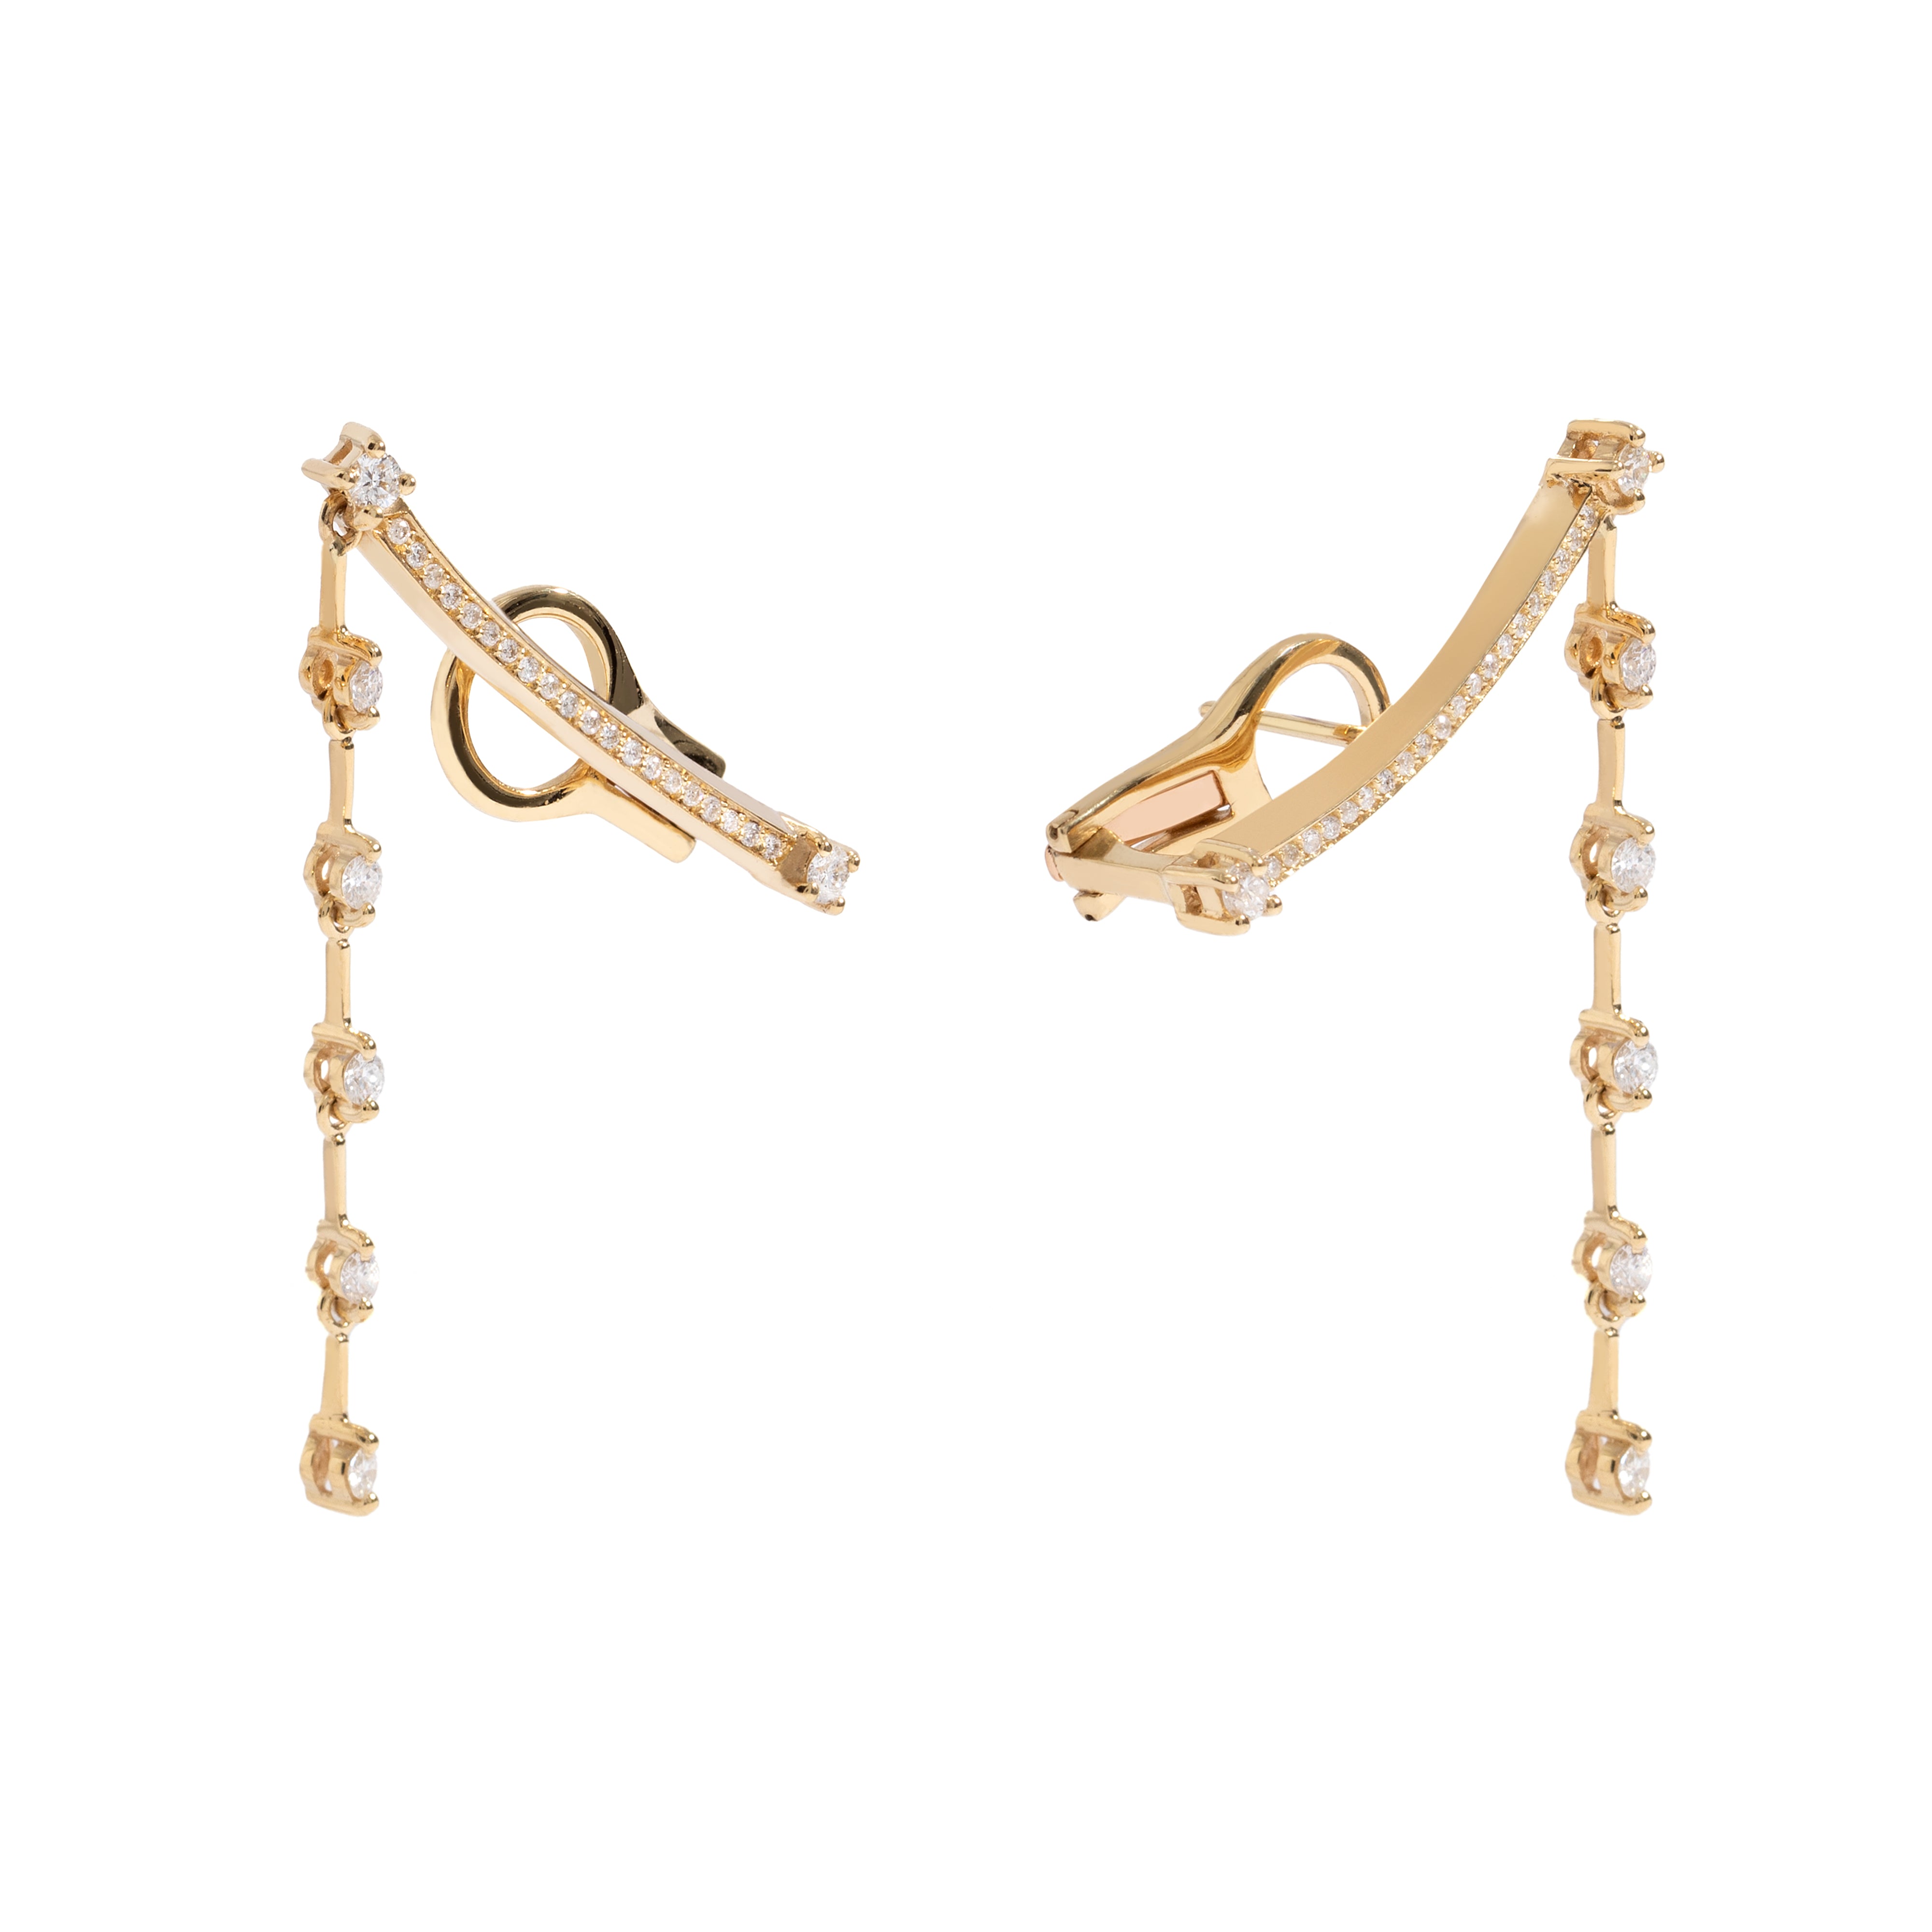 NEW VINTAGE EARRING IN 18K YELLOW GOLD WITH DIAMOND